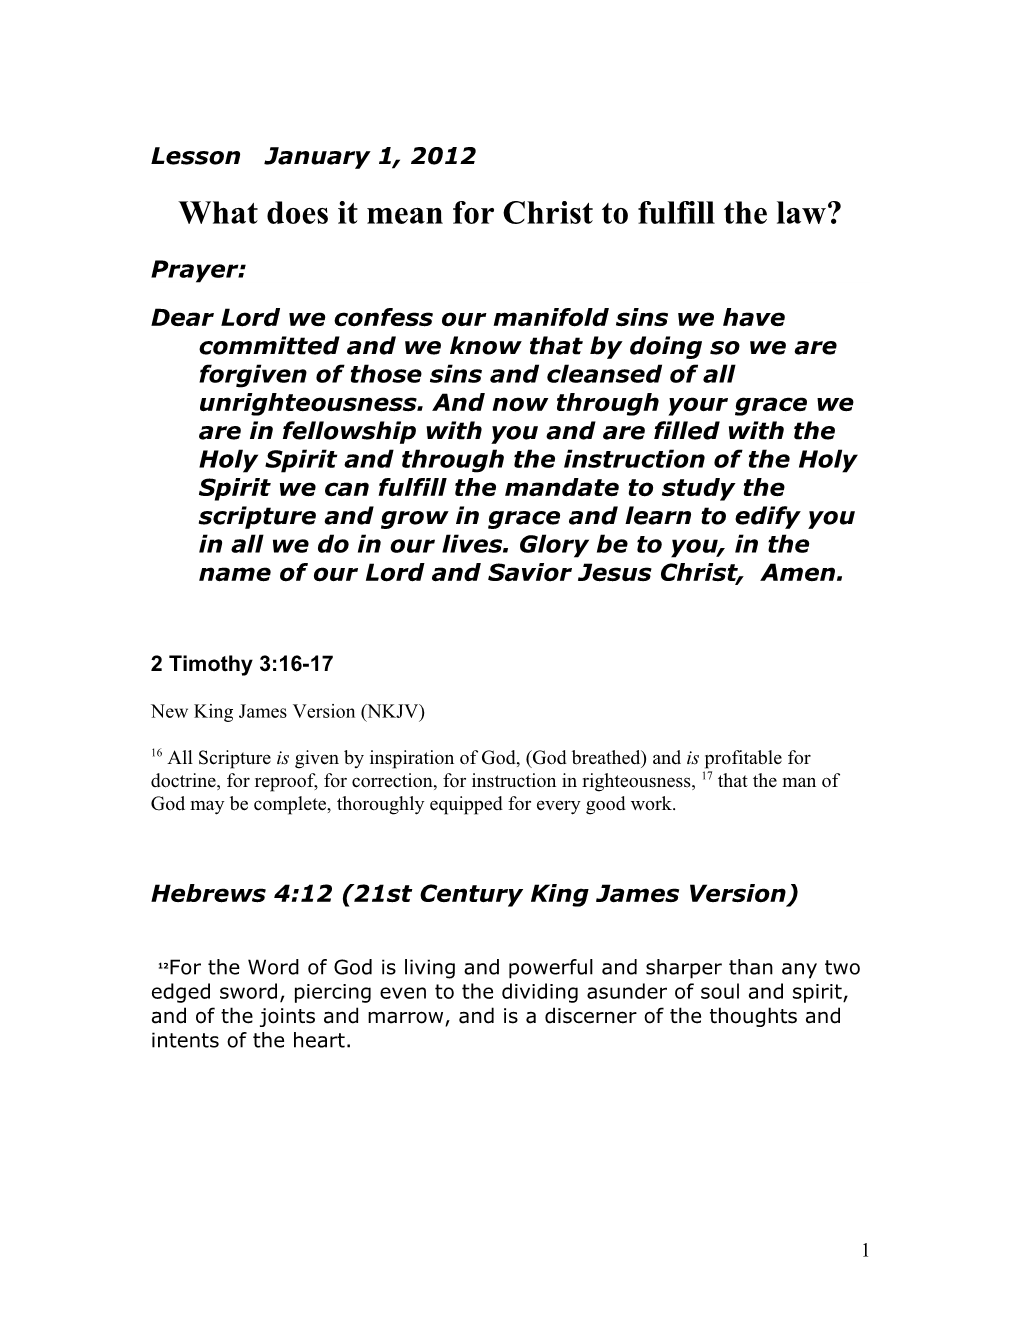 What Does It Mean for Christ to Fulfill the Law?